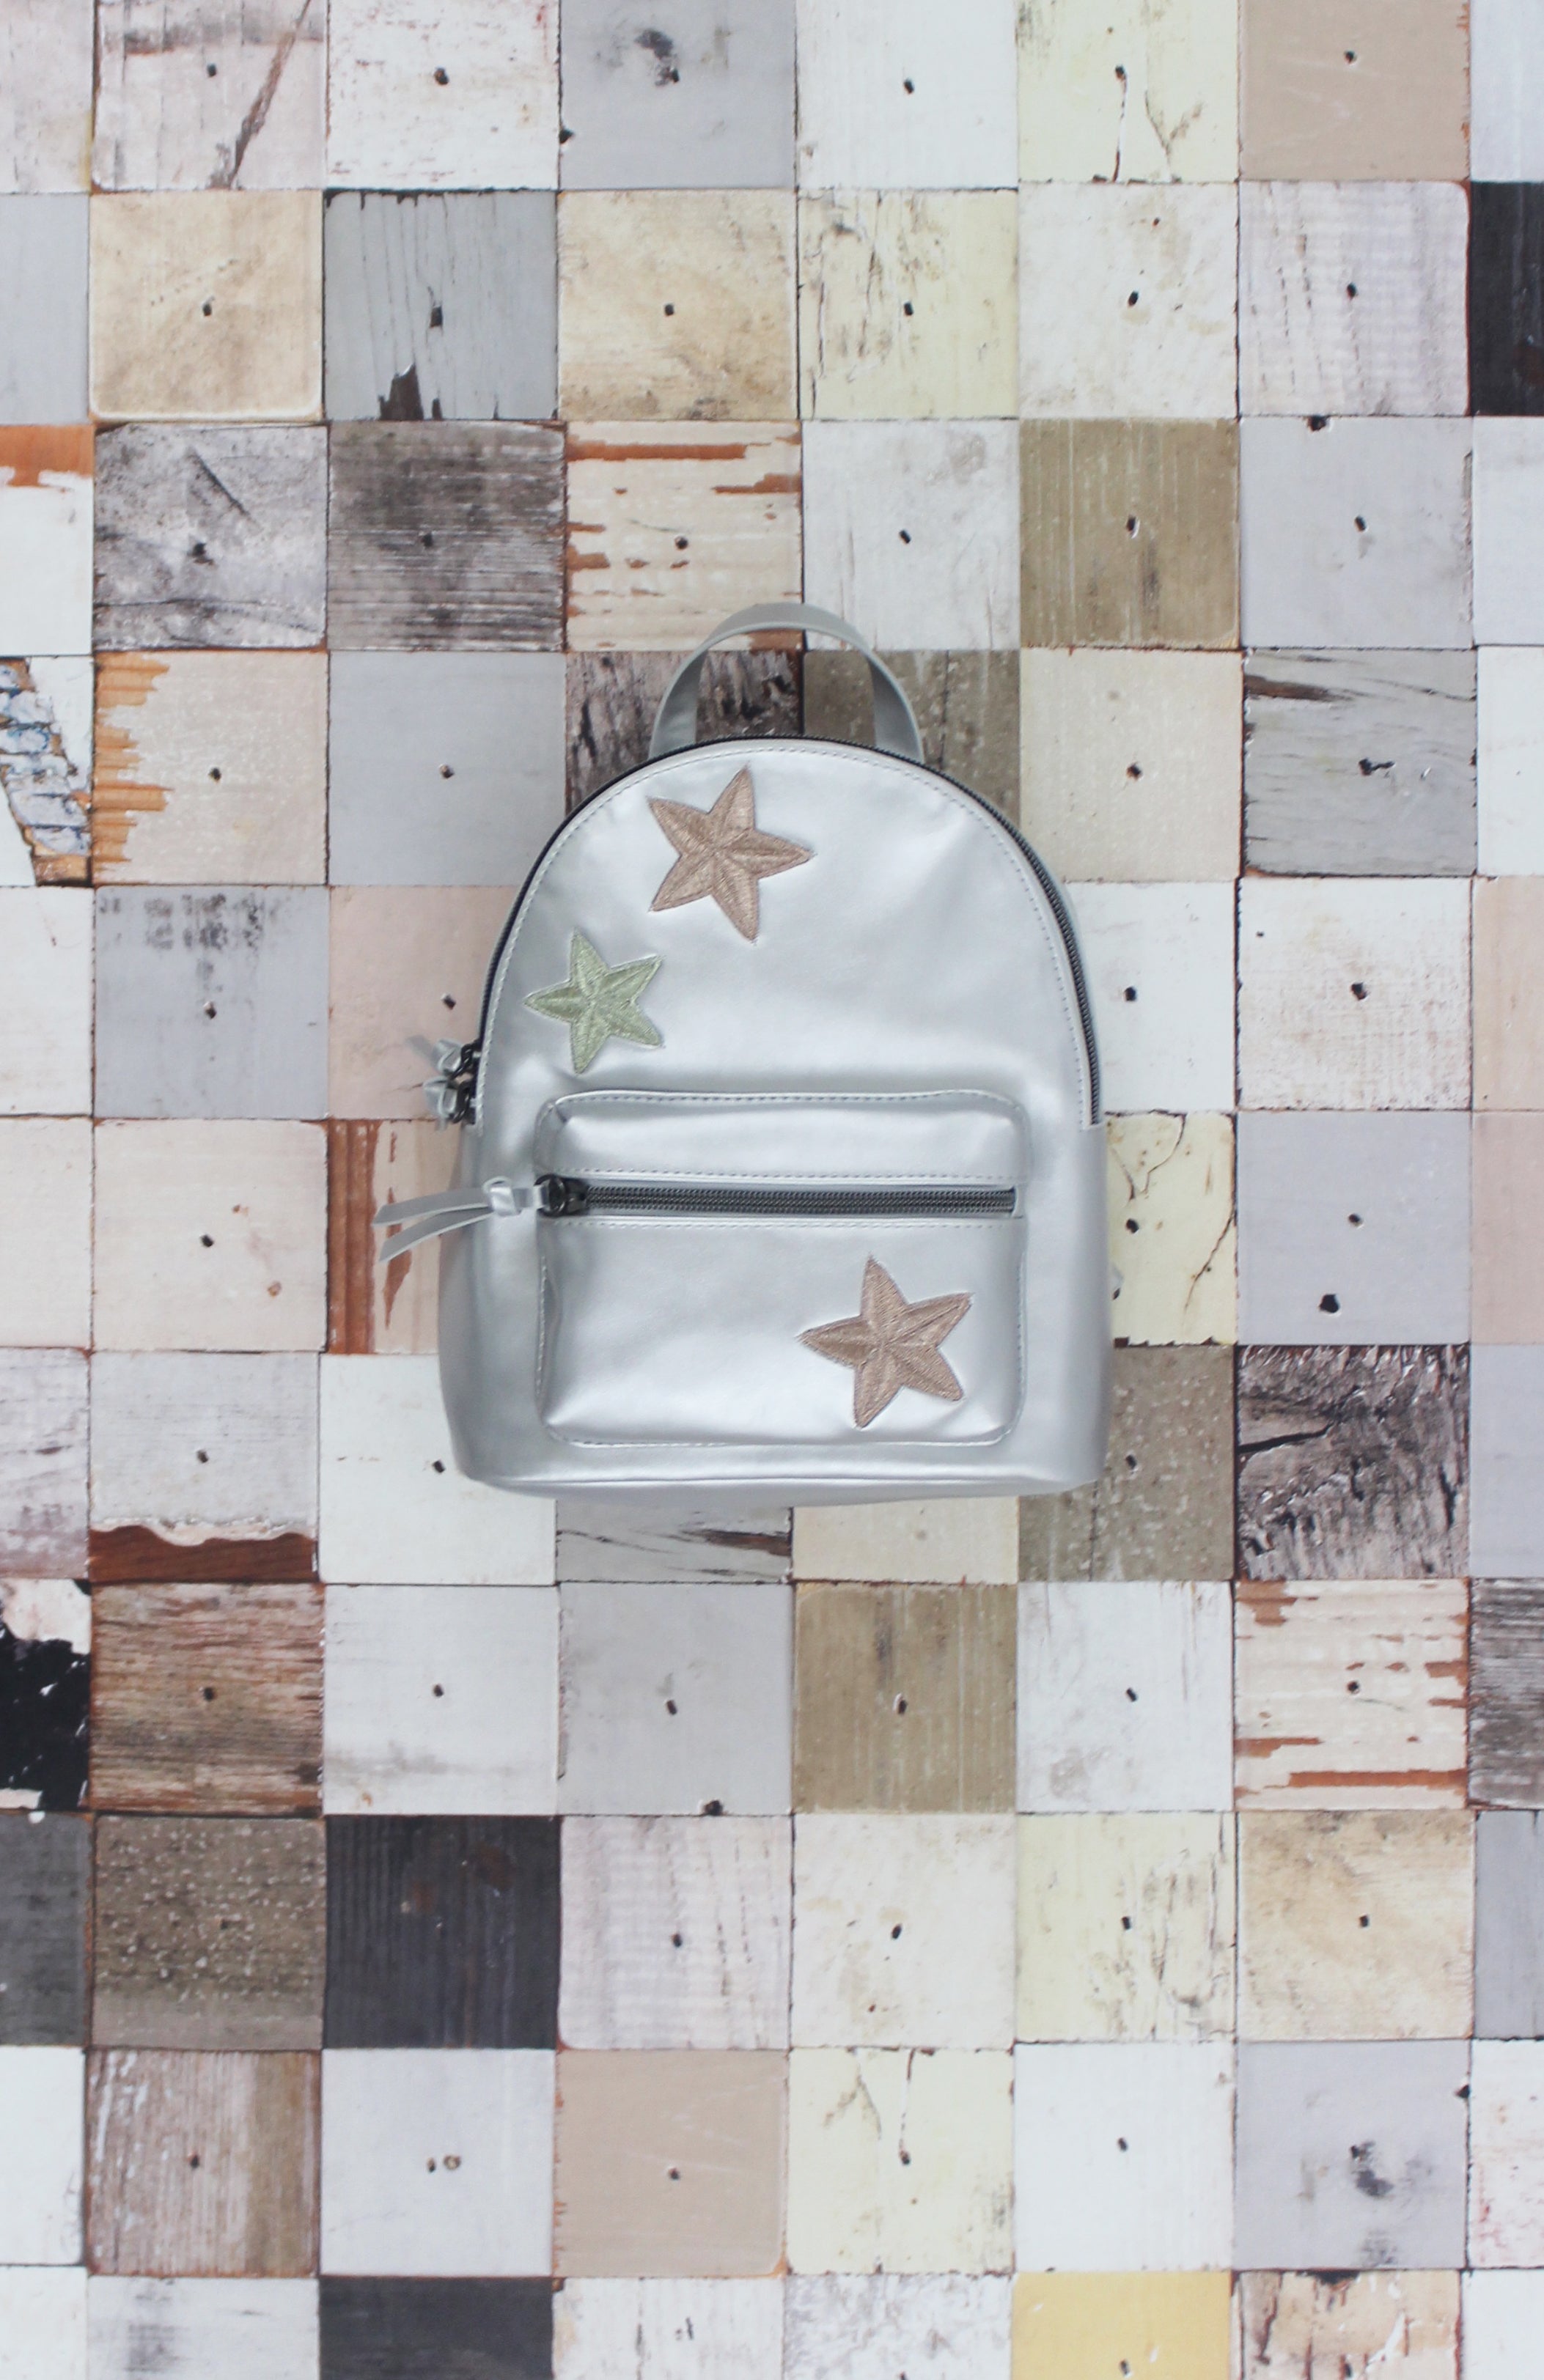 Starry Eyed Backpack in Silver